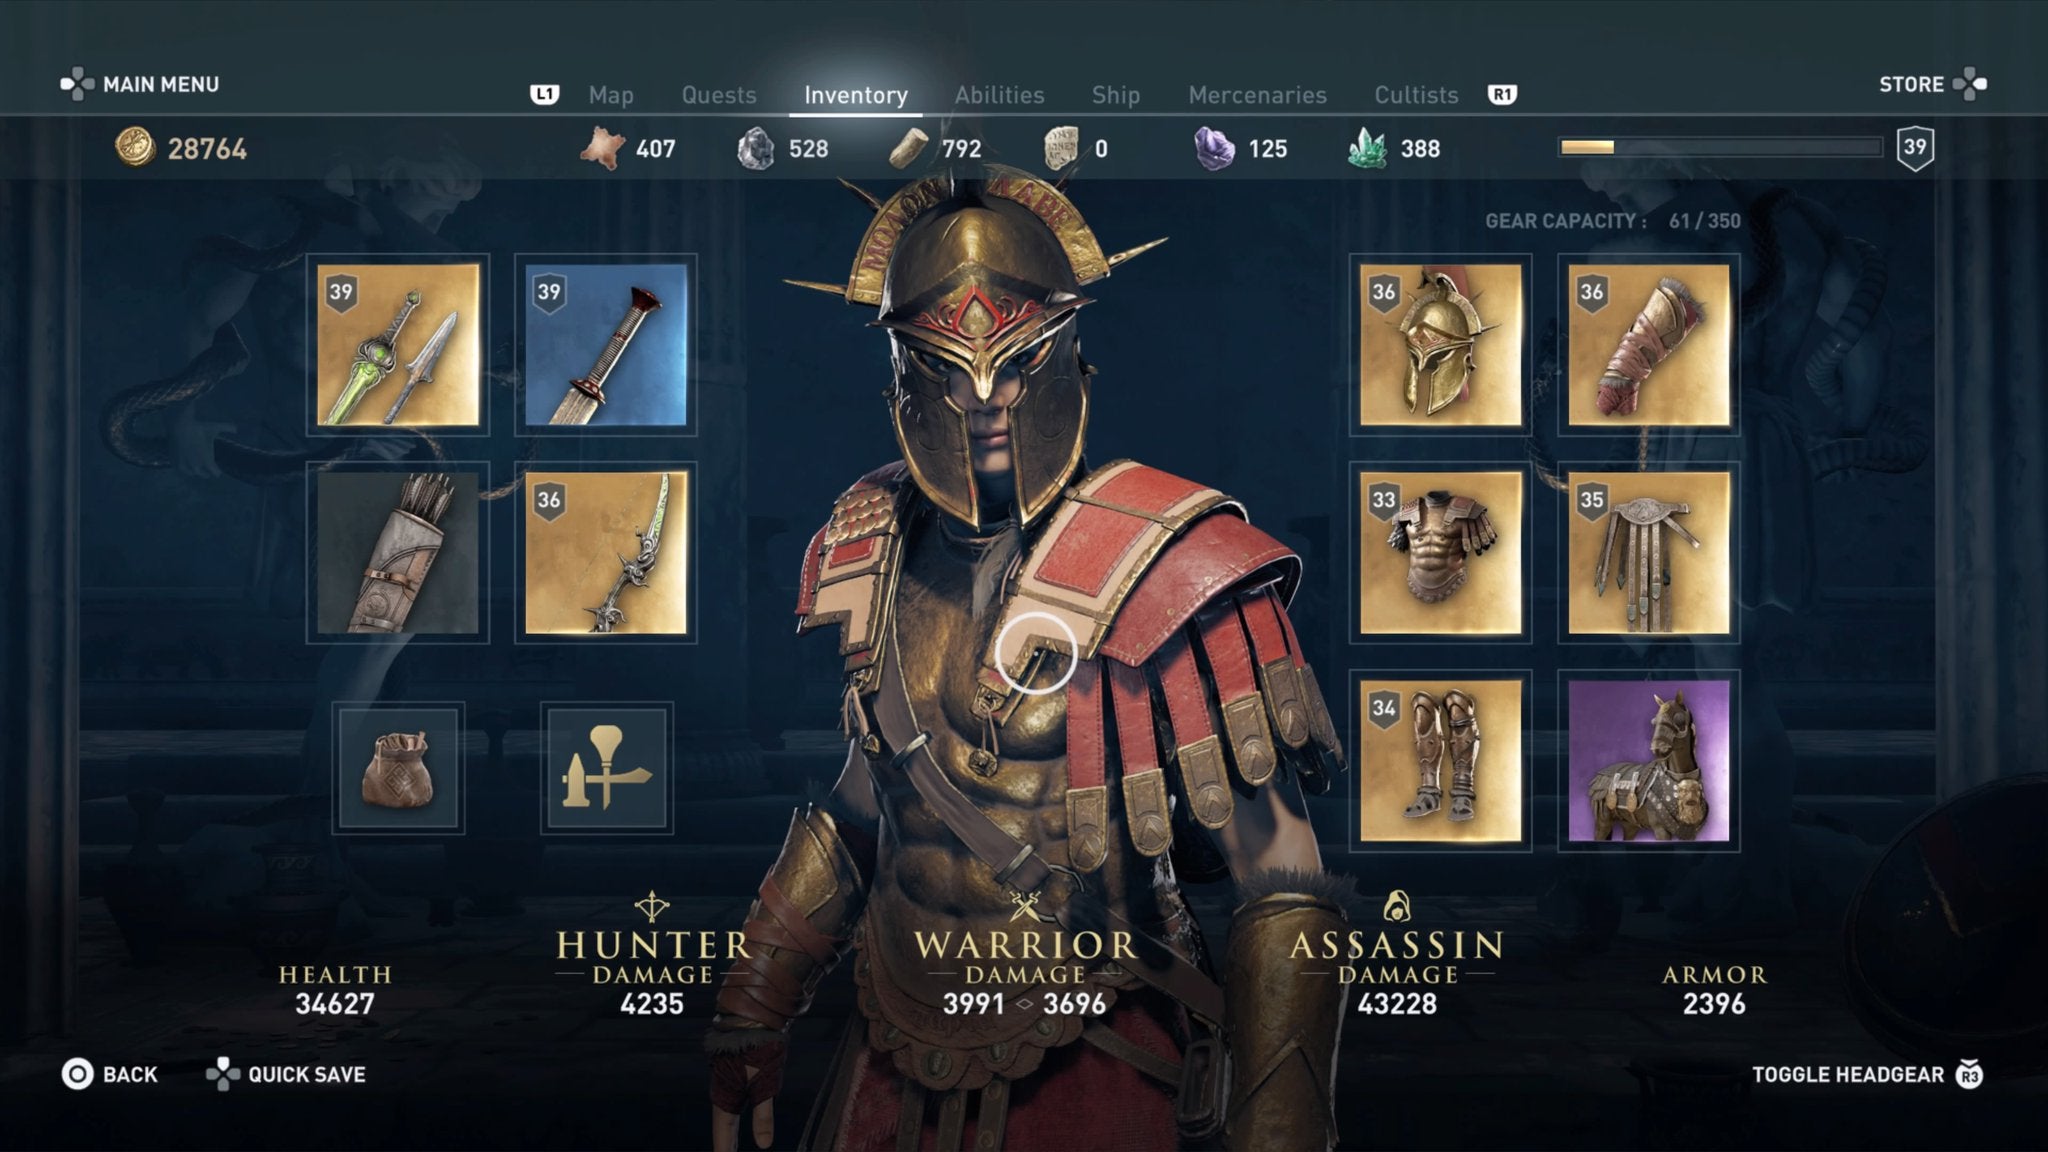 Assassin's Creed Odyssey: How to Get the Armor VG247